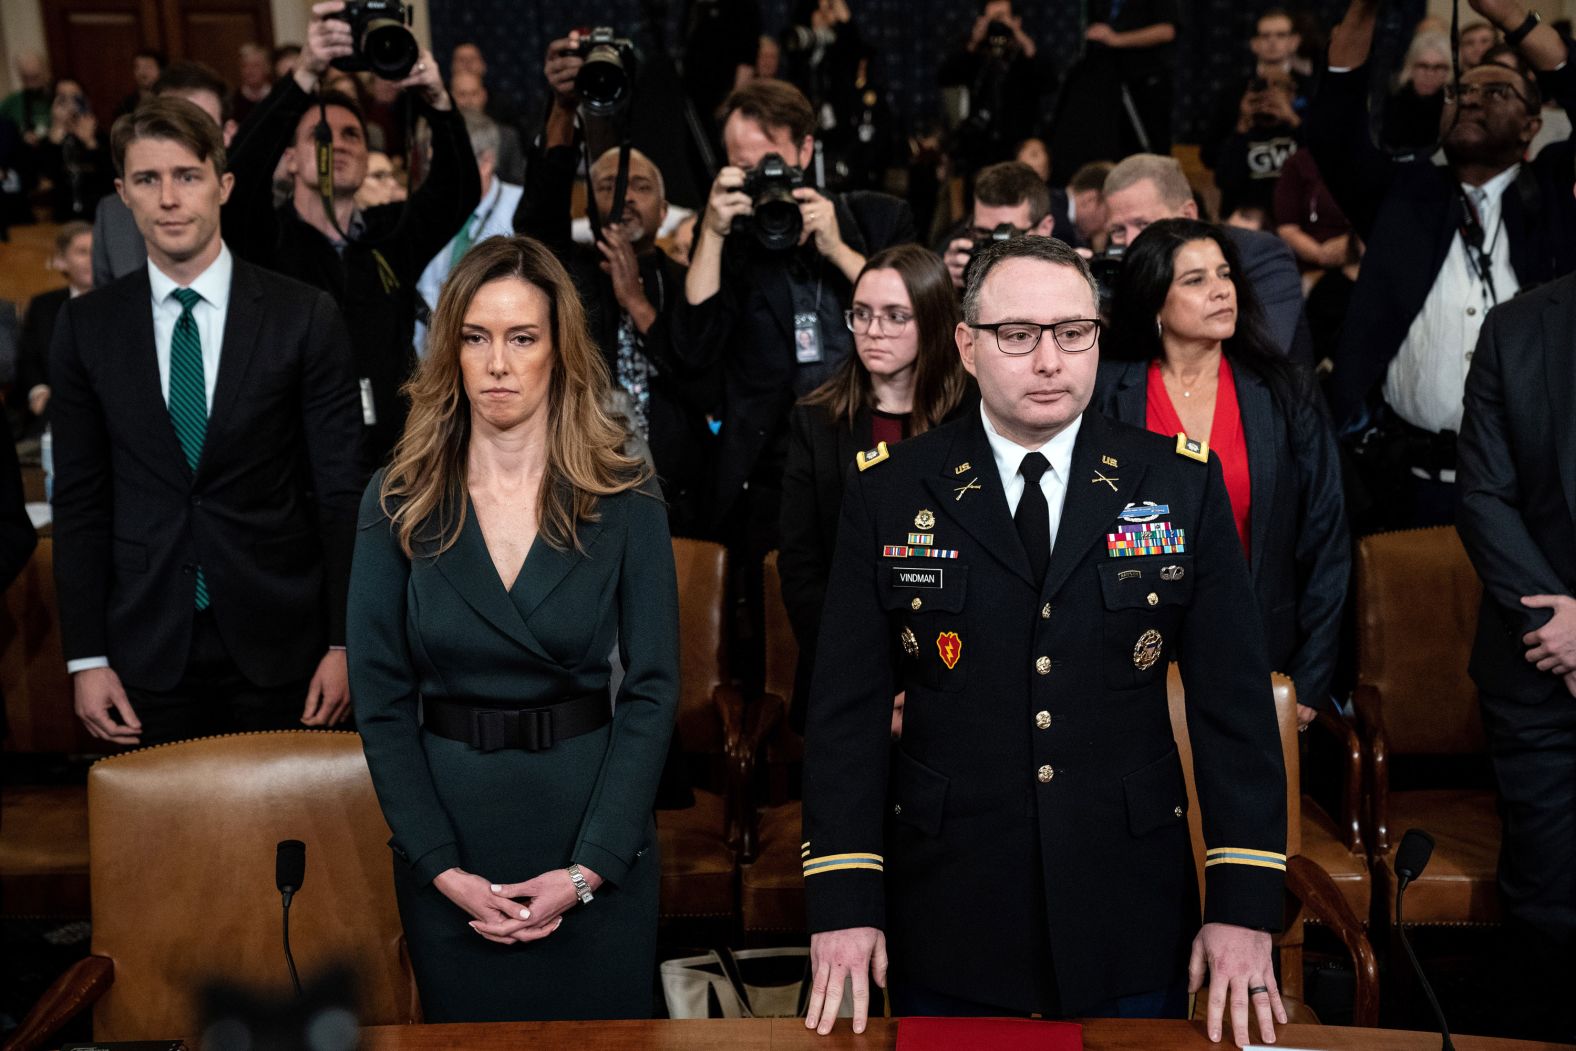 Jennifer Williams, a senior aide to Vice President Mike Pence, and Army Lt. Col. Alexander Vindman, the top Ukraine expert at the National Security Council, await the start of their testimony in Washington on November 19. It was <a href="https://www.cnn.com/2019/11/19/politics/public-impeachment-hearing-day-3/index.html" target="_blank">the third day of public hearings</a> related to the impeachment inquiry.